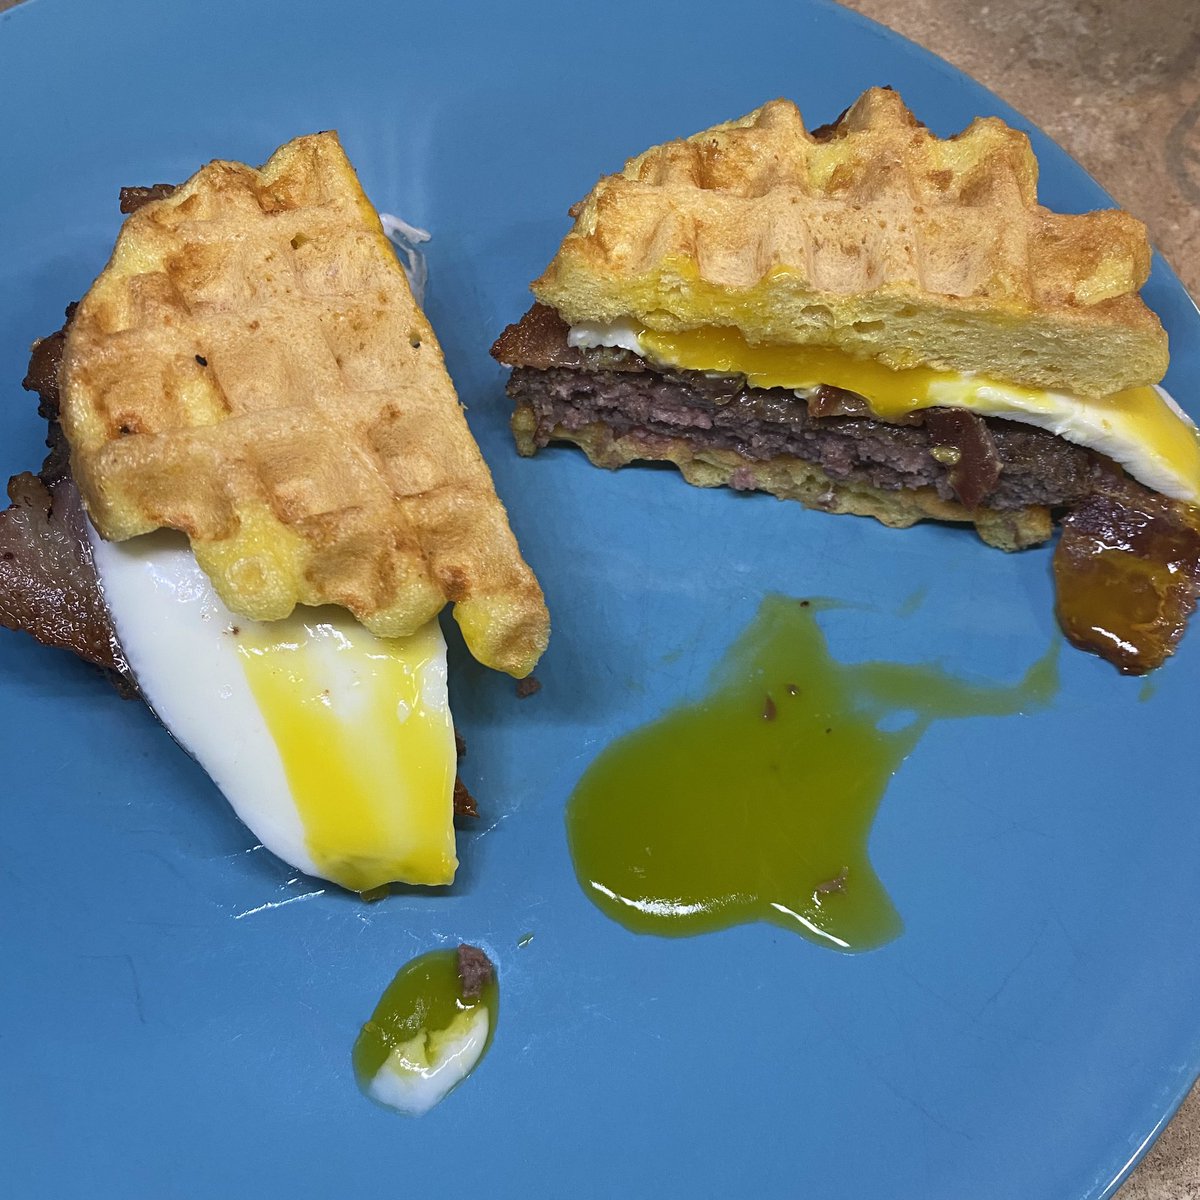 I fasted yesterday, so today I broke a 44 hour fast with pot roast in an egglife wrap, and buttery egg pudding. Then a little while later I followed that up with an amazing bacon & egg burger on eggy waffles.

#carnivore #carnivorediet #keto #fasting